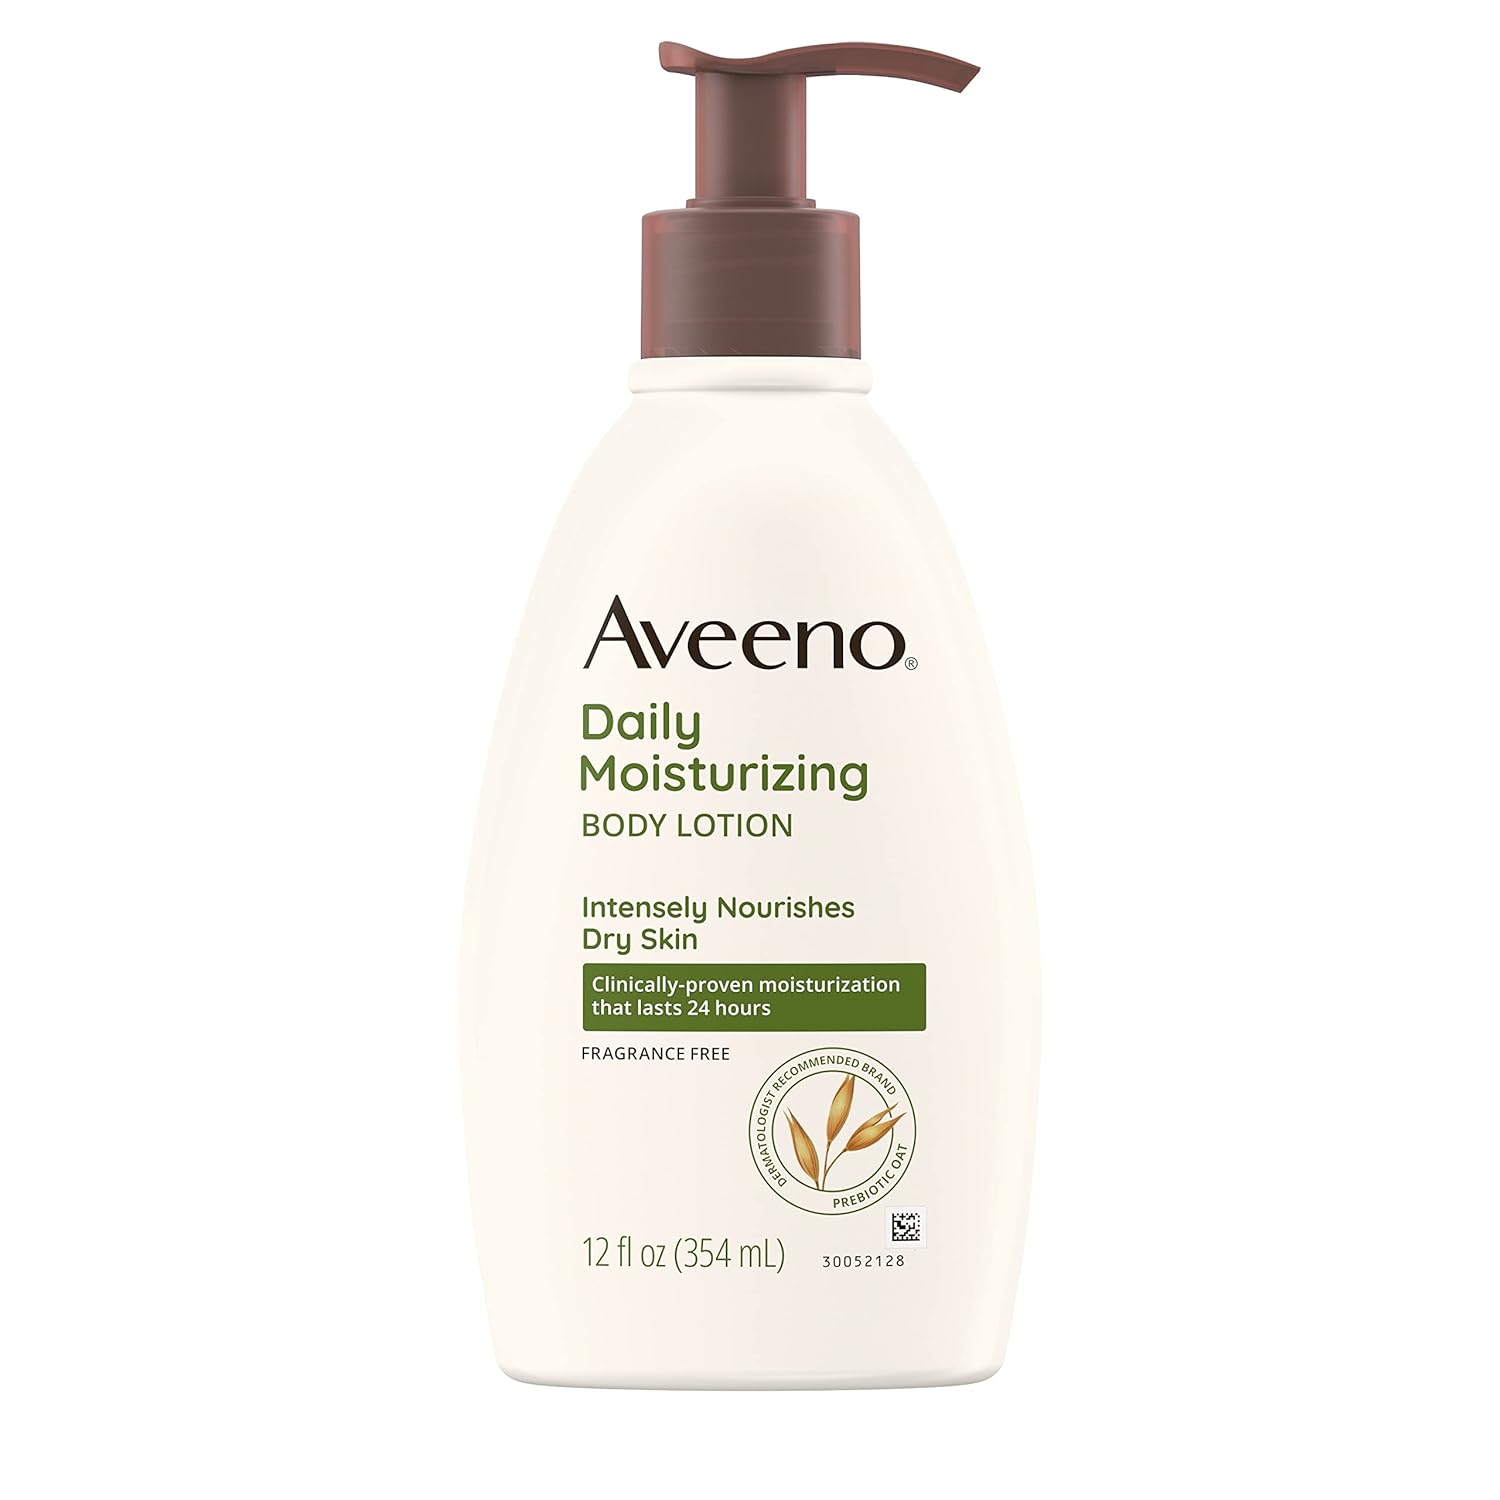 Aveeno Daily Moisturizing Body Lotion with Soothing Prebiotic Oat, Gentle Lotion Nourishes Dry Skin With Moisture, Paraben-, Dye- & Fragrance-Free, Non-Greasy & Non-Comedogenic, 12 fl. Oz